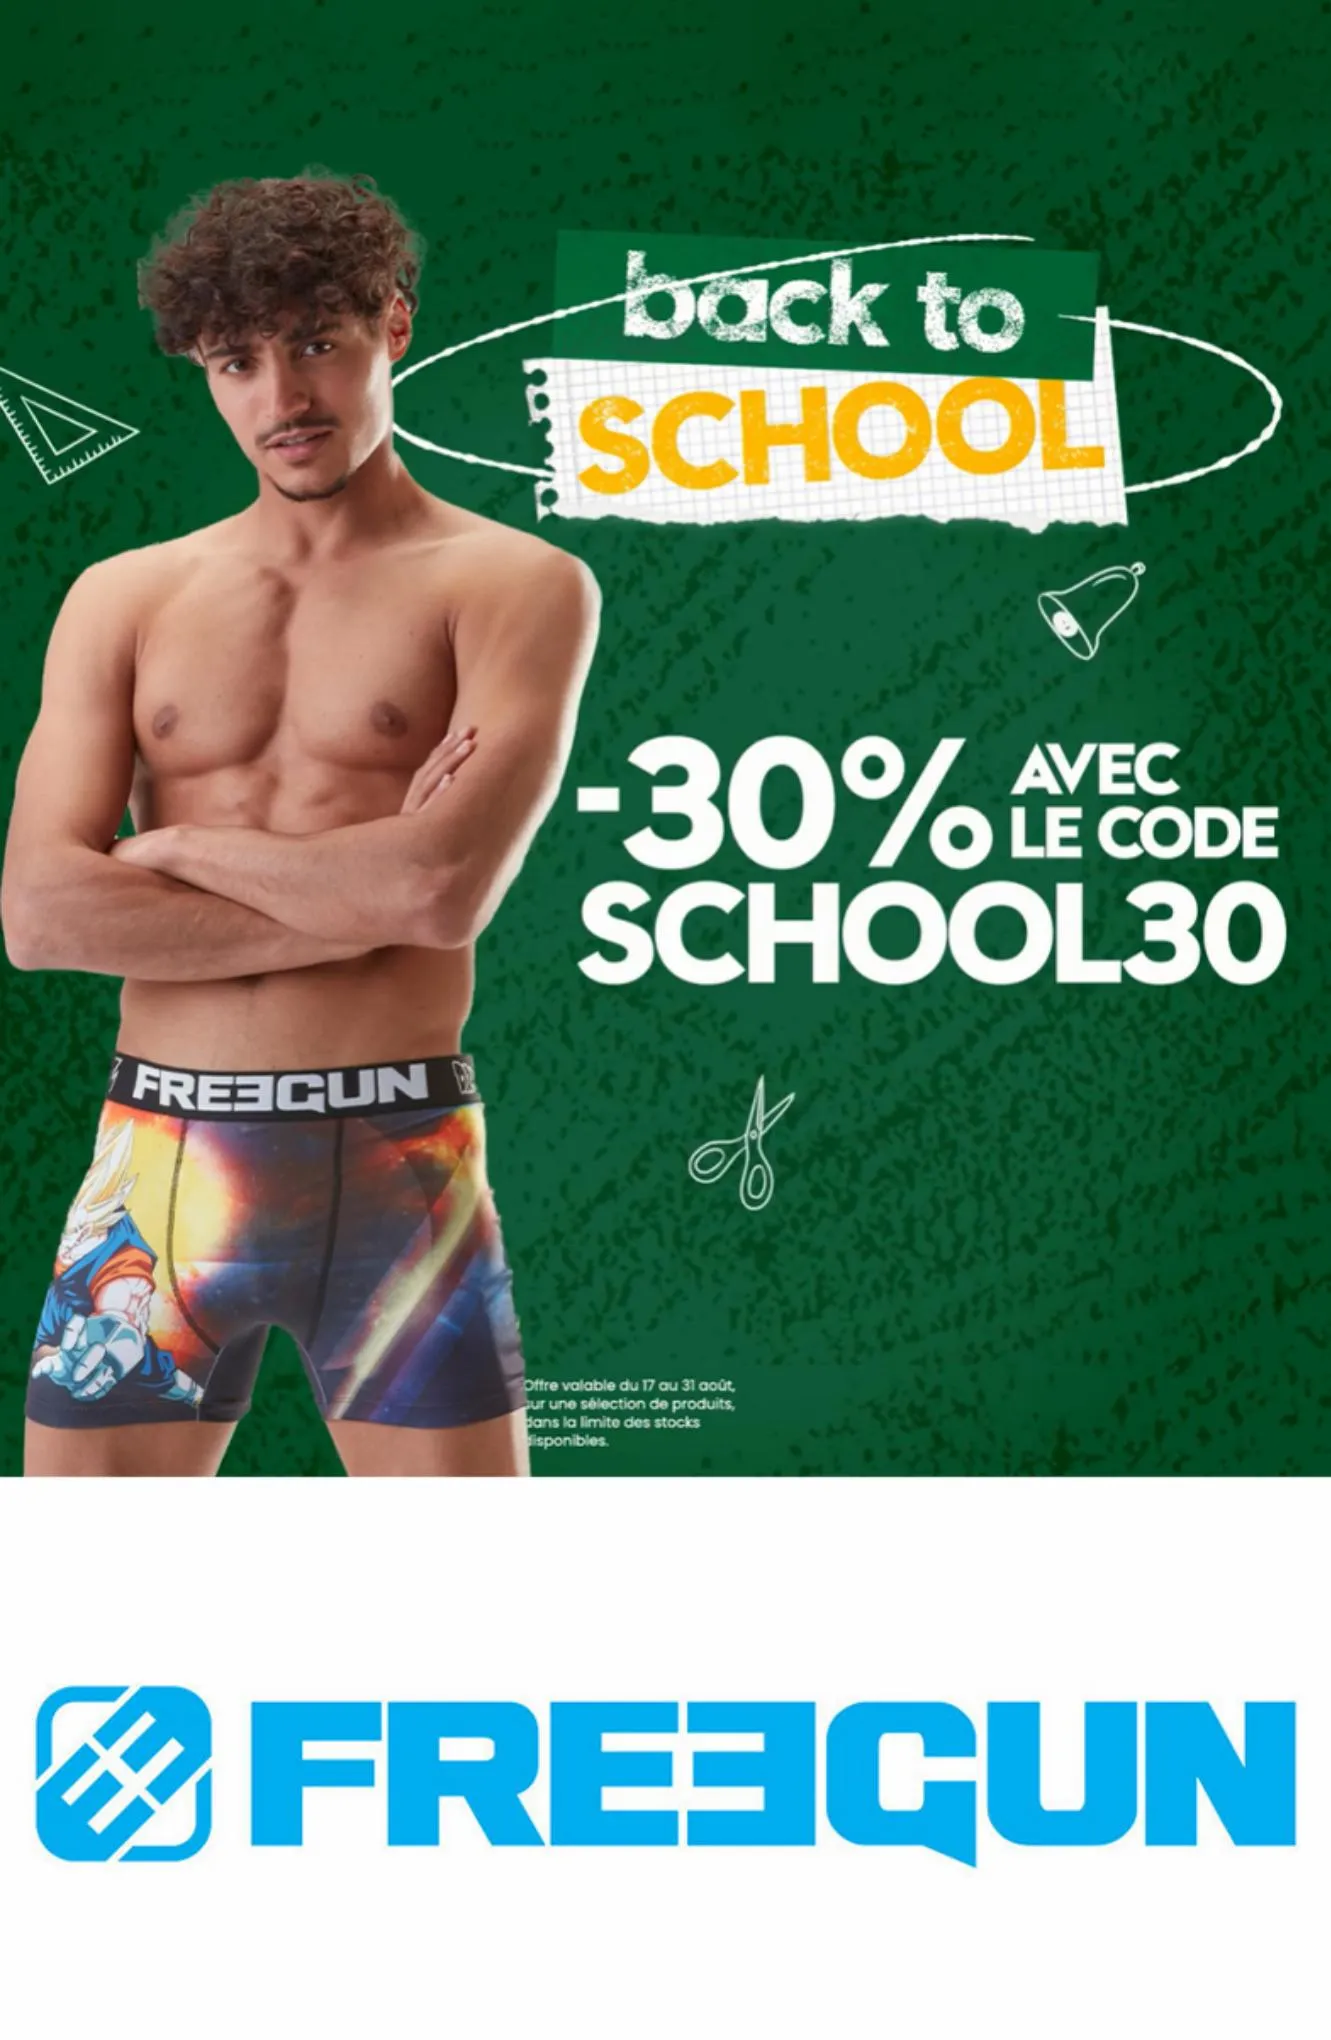 Catalogue Back to School Promotions, page 00001